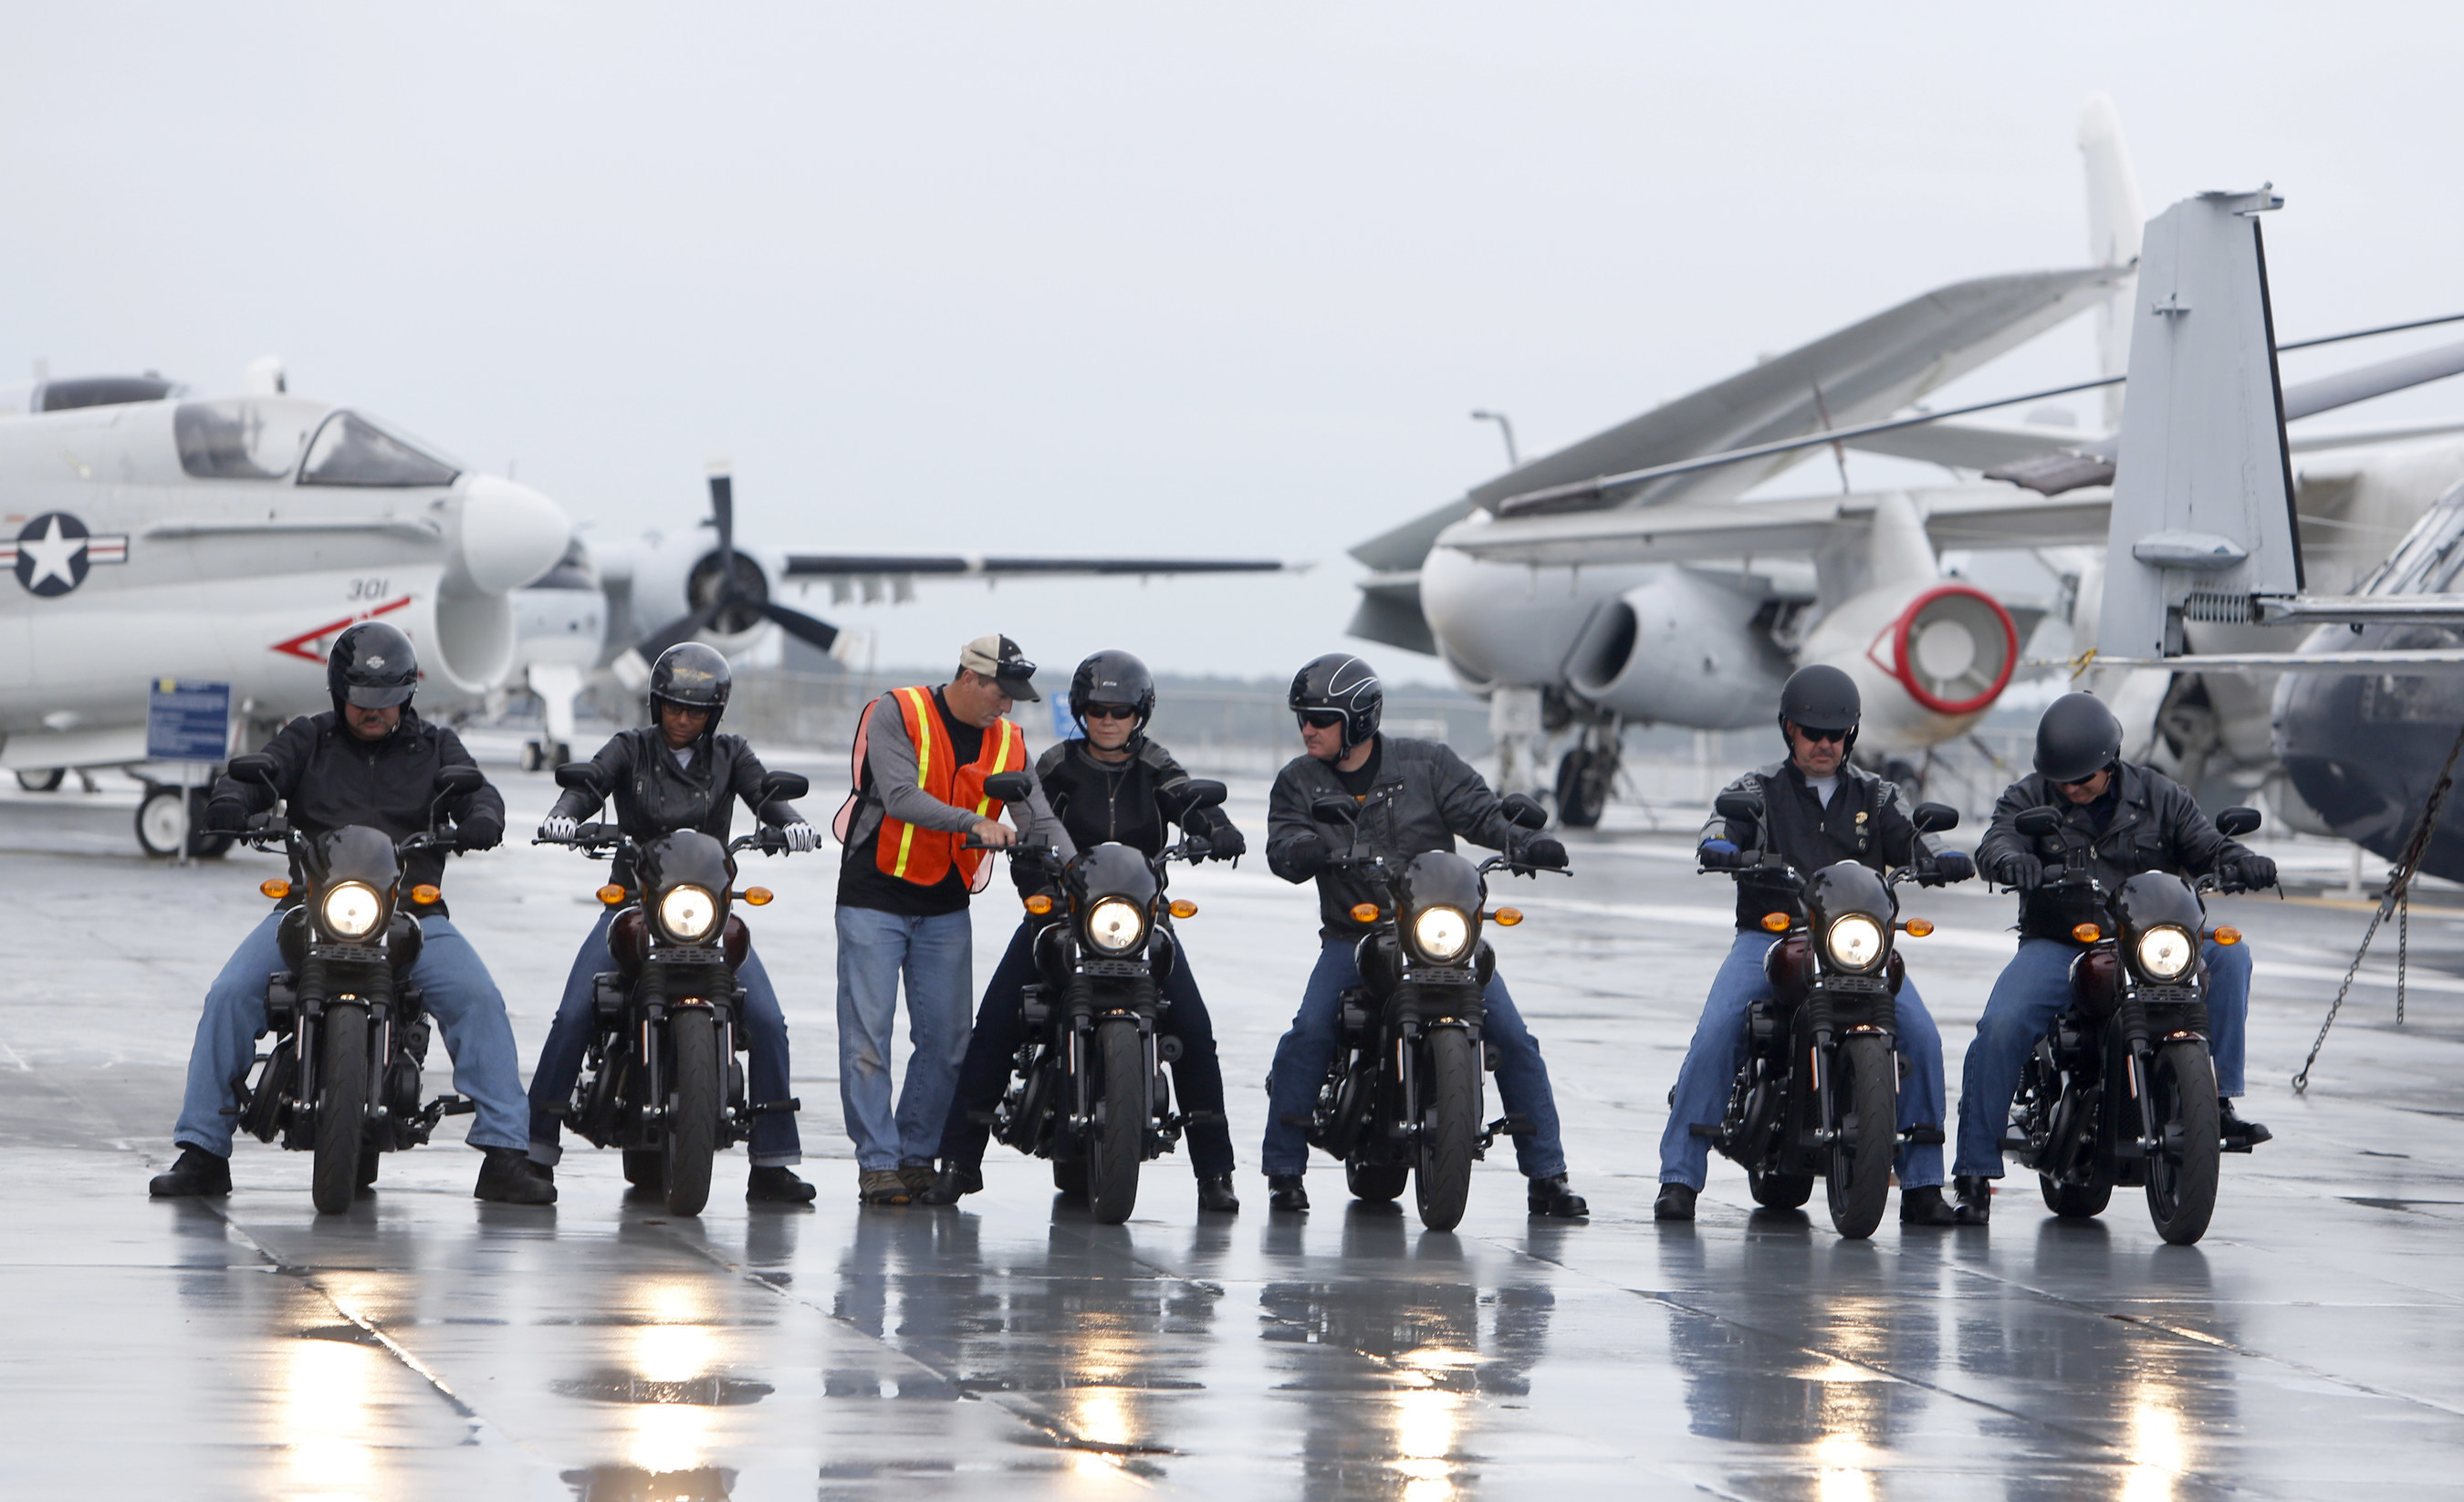 Harley-Davidson announced the extension of free Riding Academy motorcycle training to all current and former U.S. military. The program is now available to active-duty, retired, reservists and veterans Jan. 1-Dec. 31, 2016.